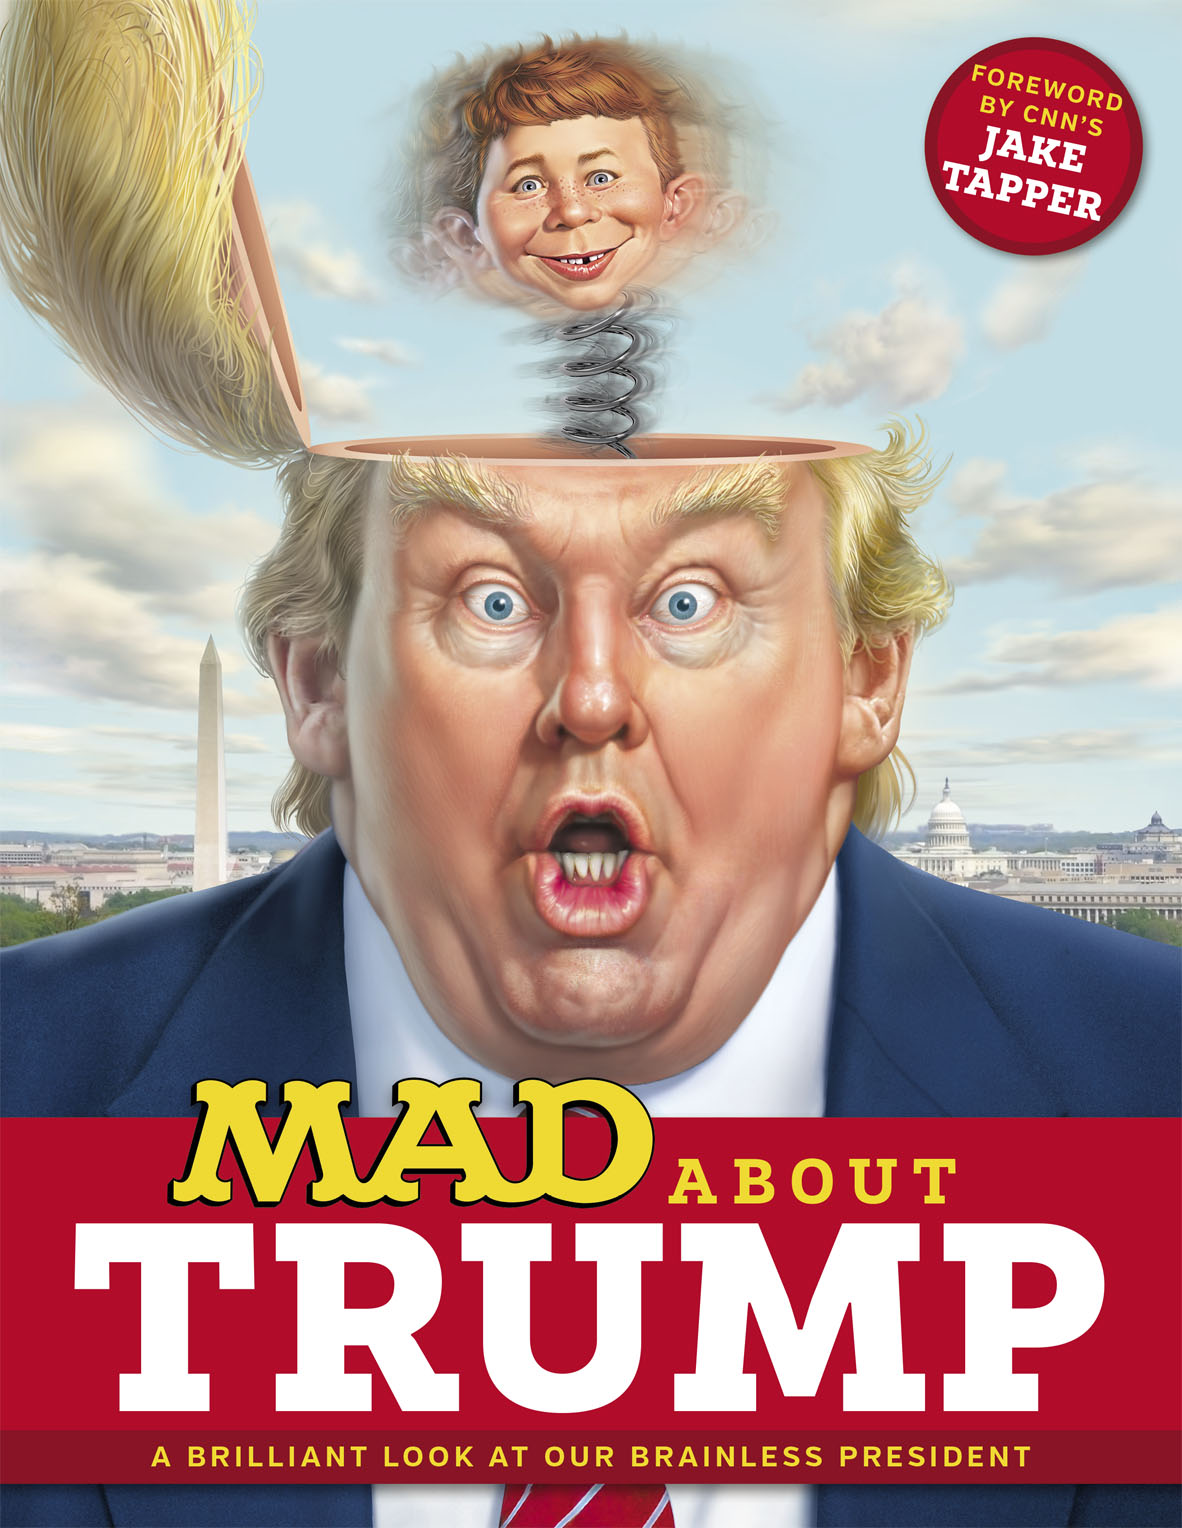 MAD About Trump: A Brilliant Look at Our Brainless President preview images